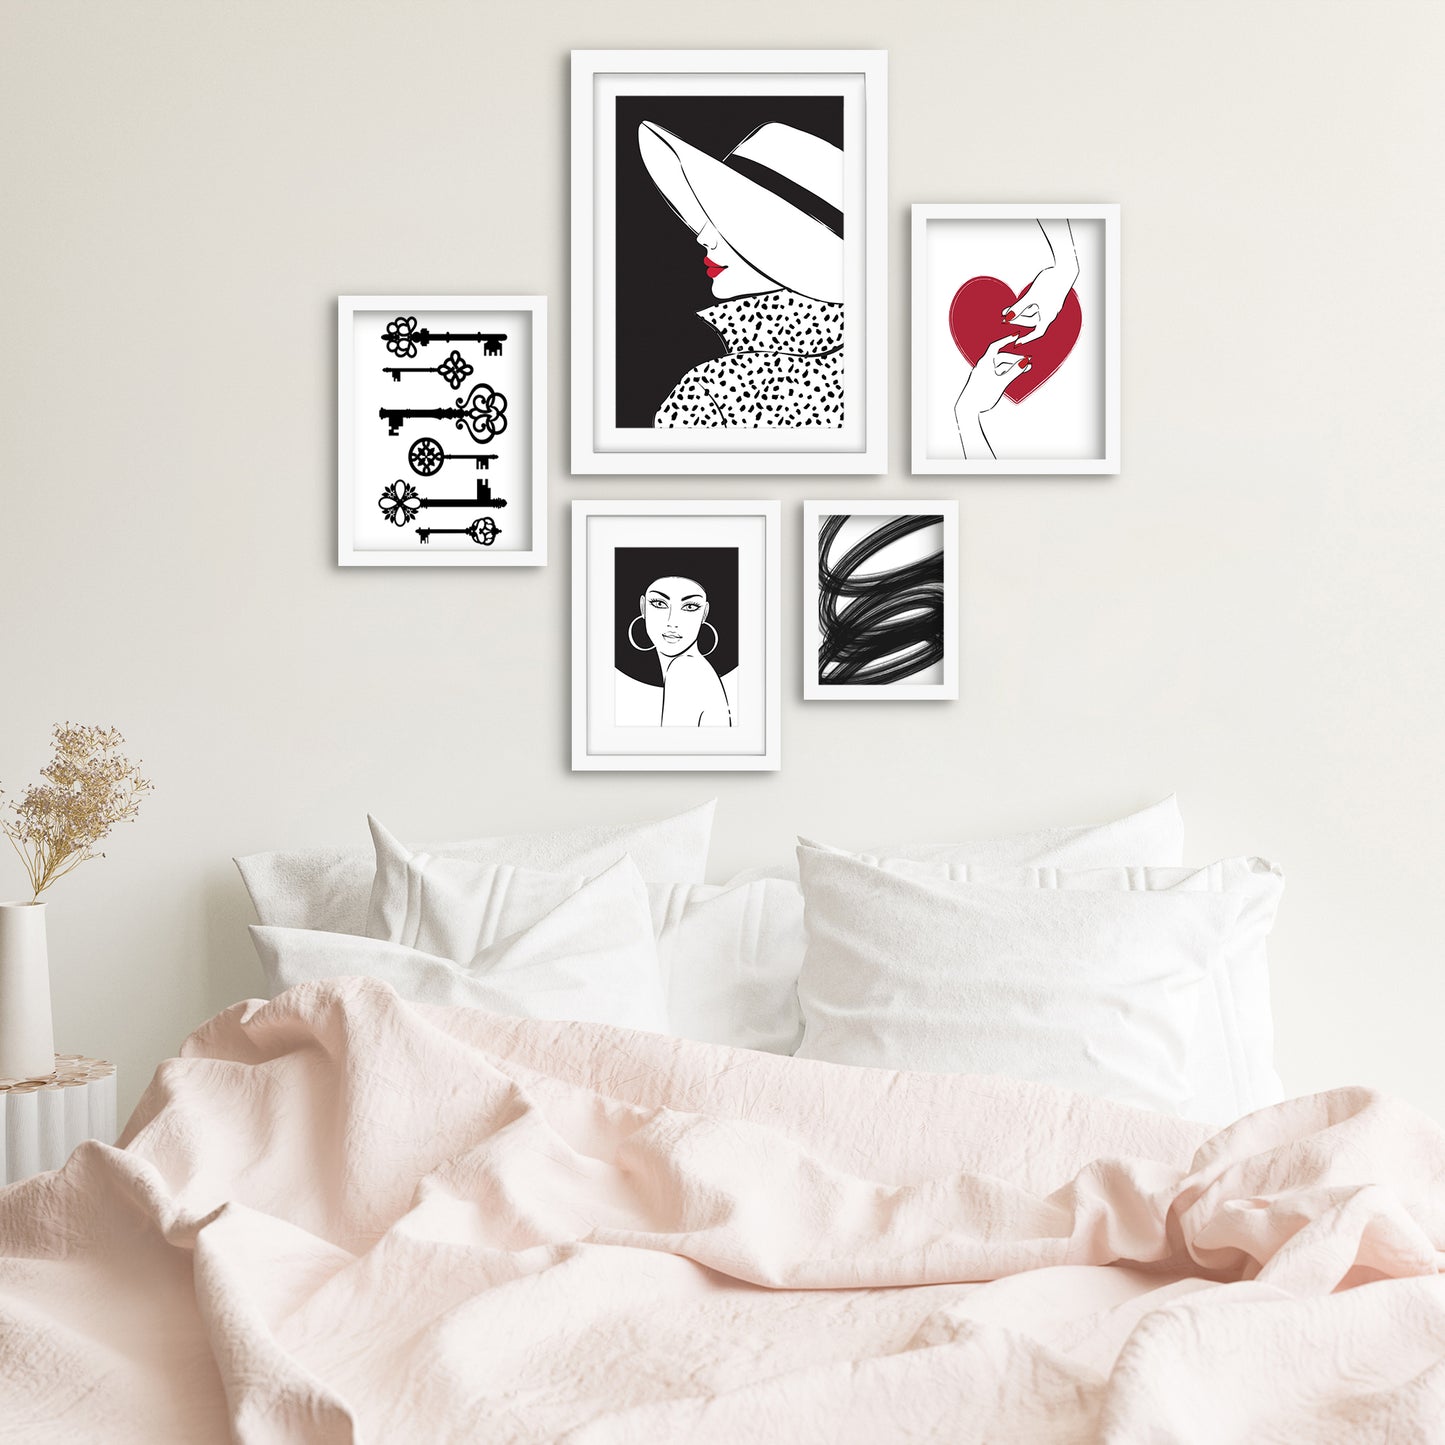 Americanflat 5 Piece Black Framed Gallery Wall Art Set - Black, White & Red Abstract Feminine Wire Art